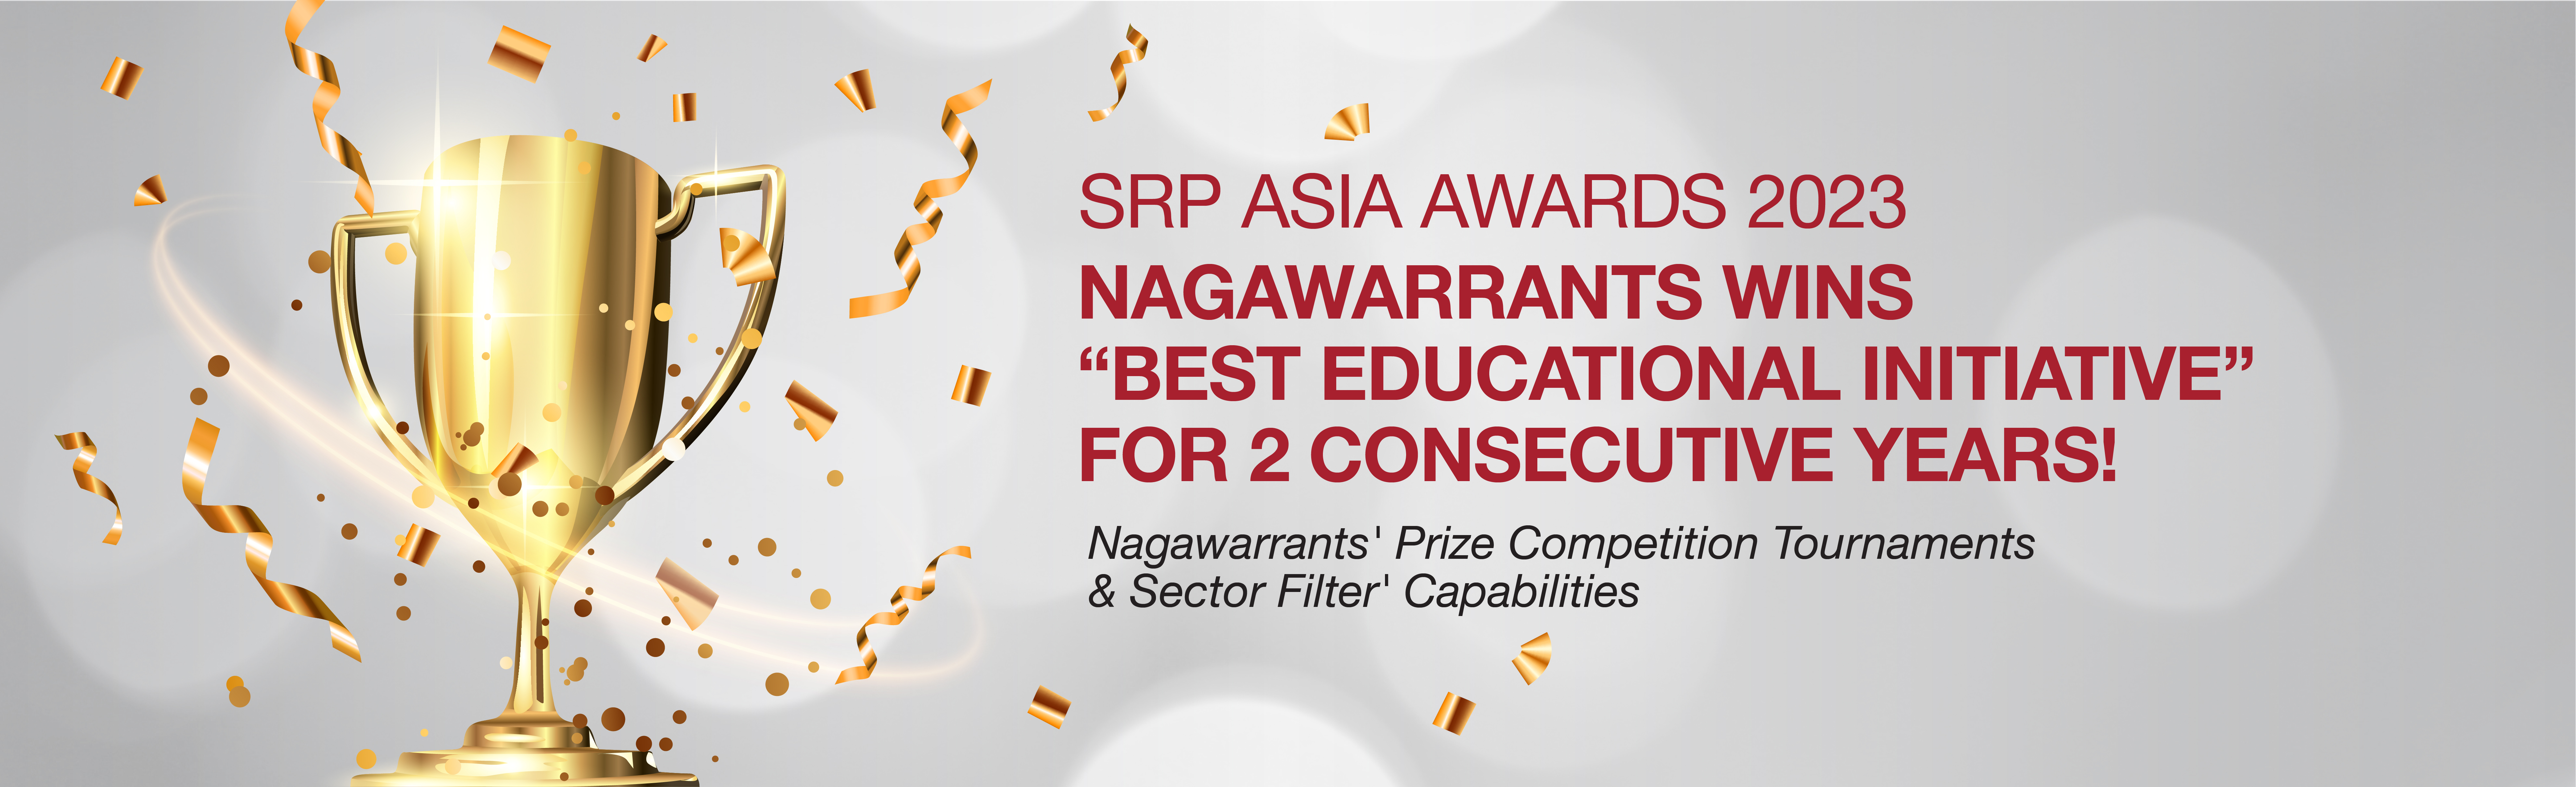 SRP Asia Awards for 2 consecutive years